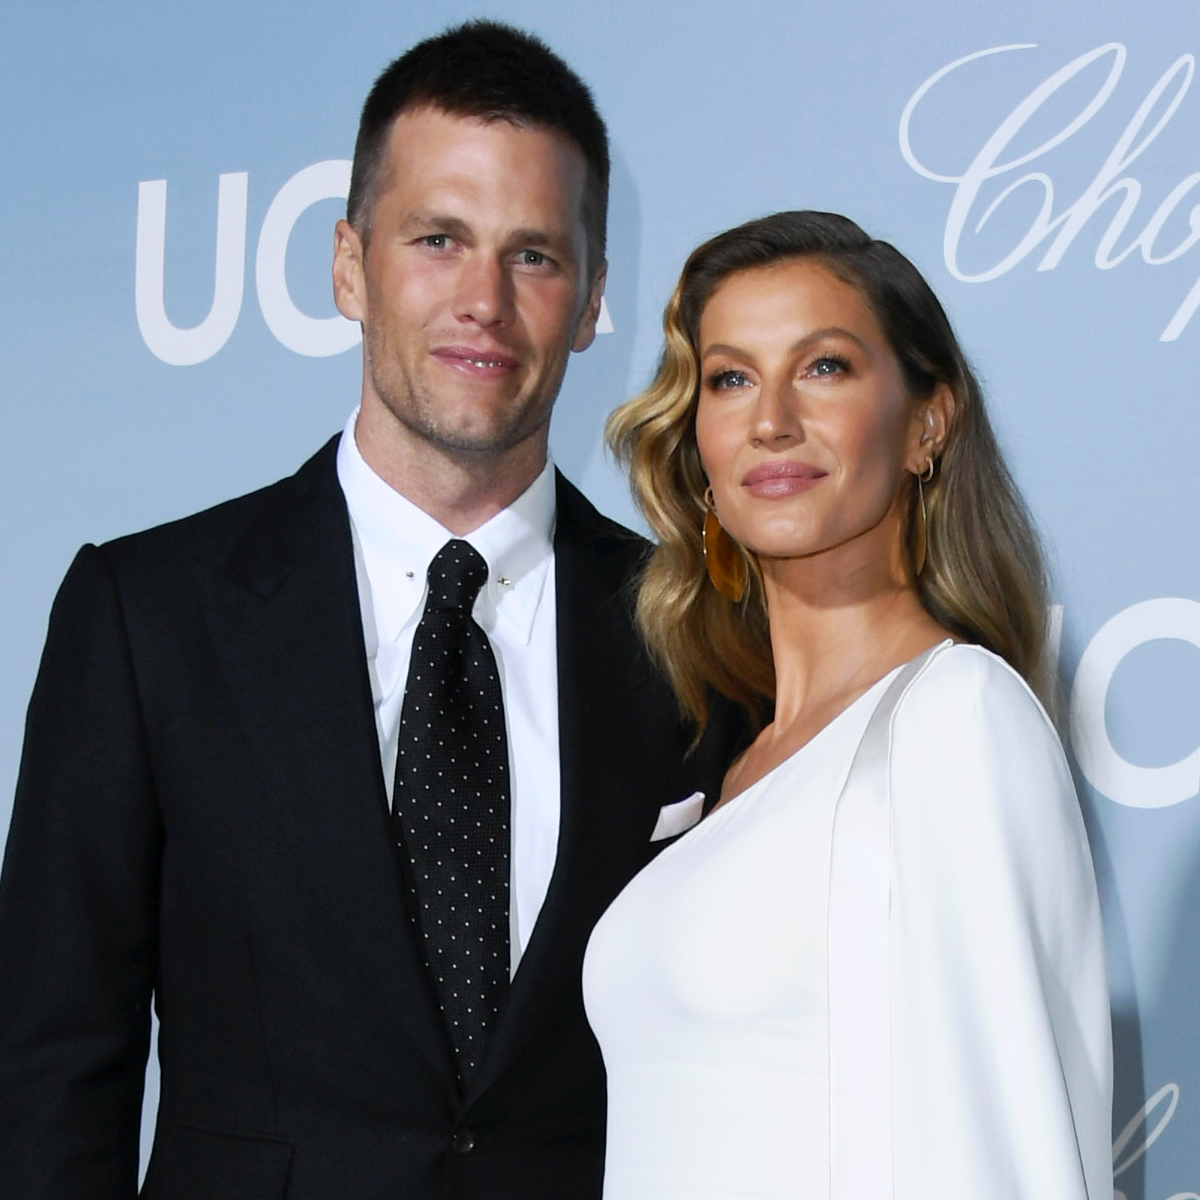 How Tom Brady and Gisele Bündchen Are Dividing Their Real Estate